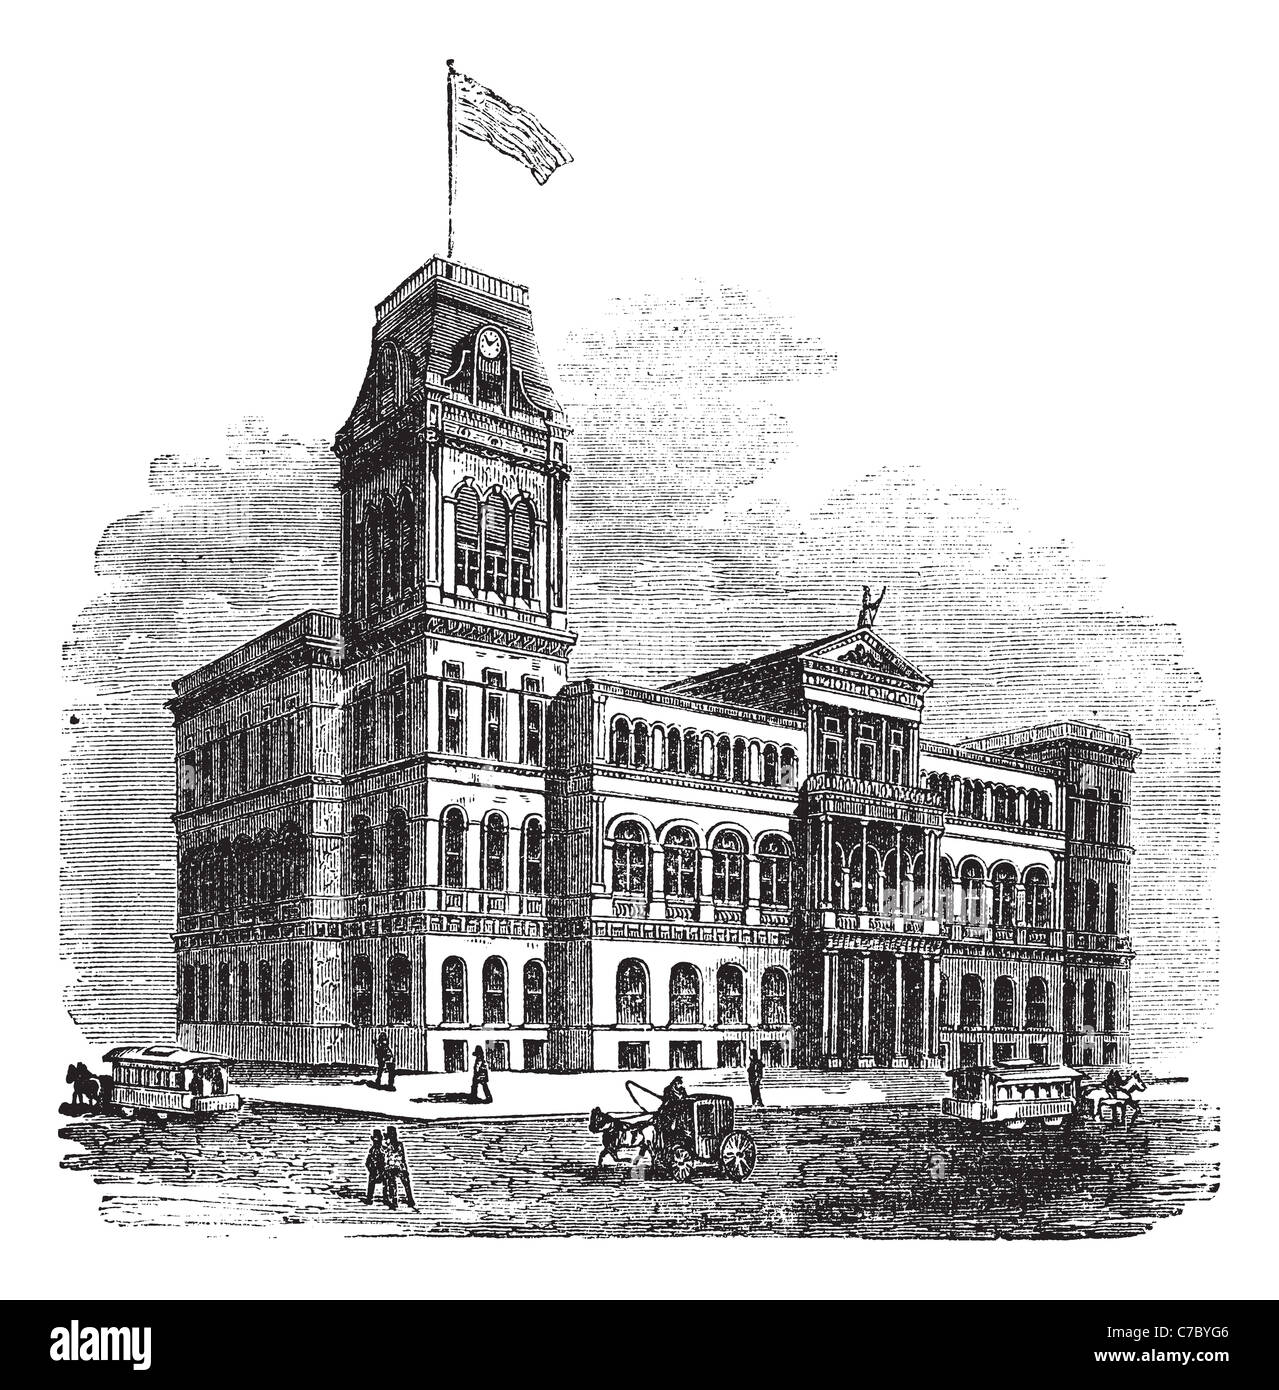 Louisville City Hall in Louisville, Kentucky, United States, during the 1890s, vintage engraving. Stock Photo